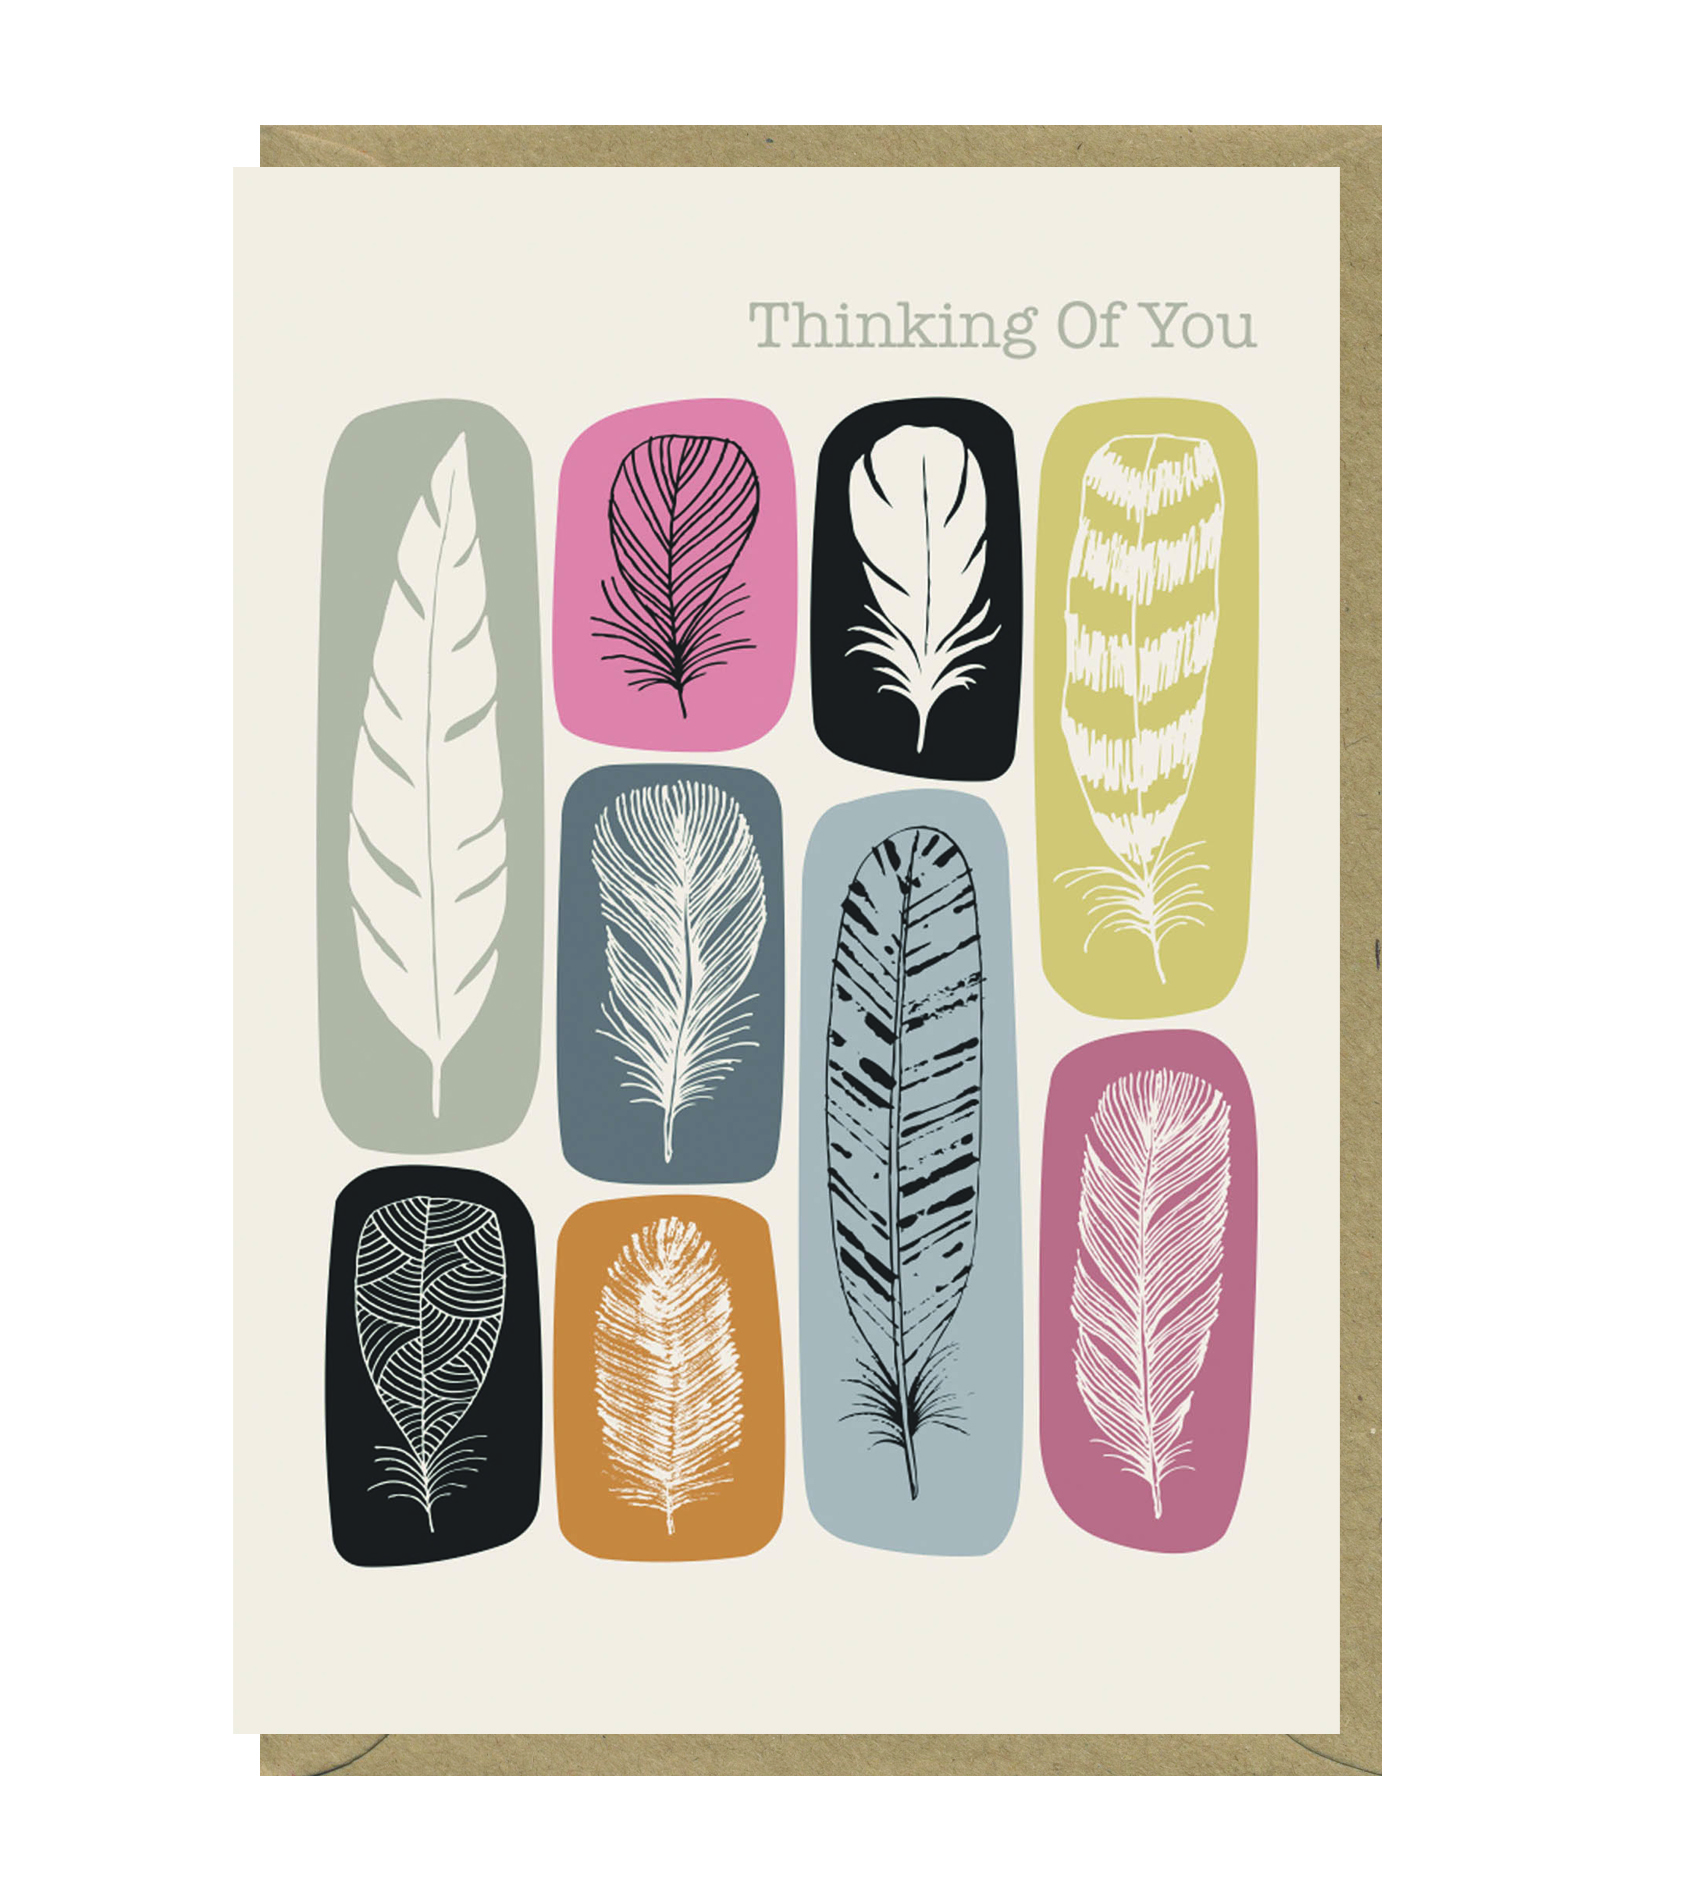 Thinking of you card by eloise renouf for earlybird designs